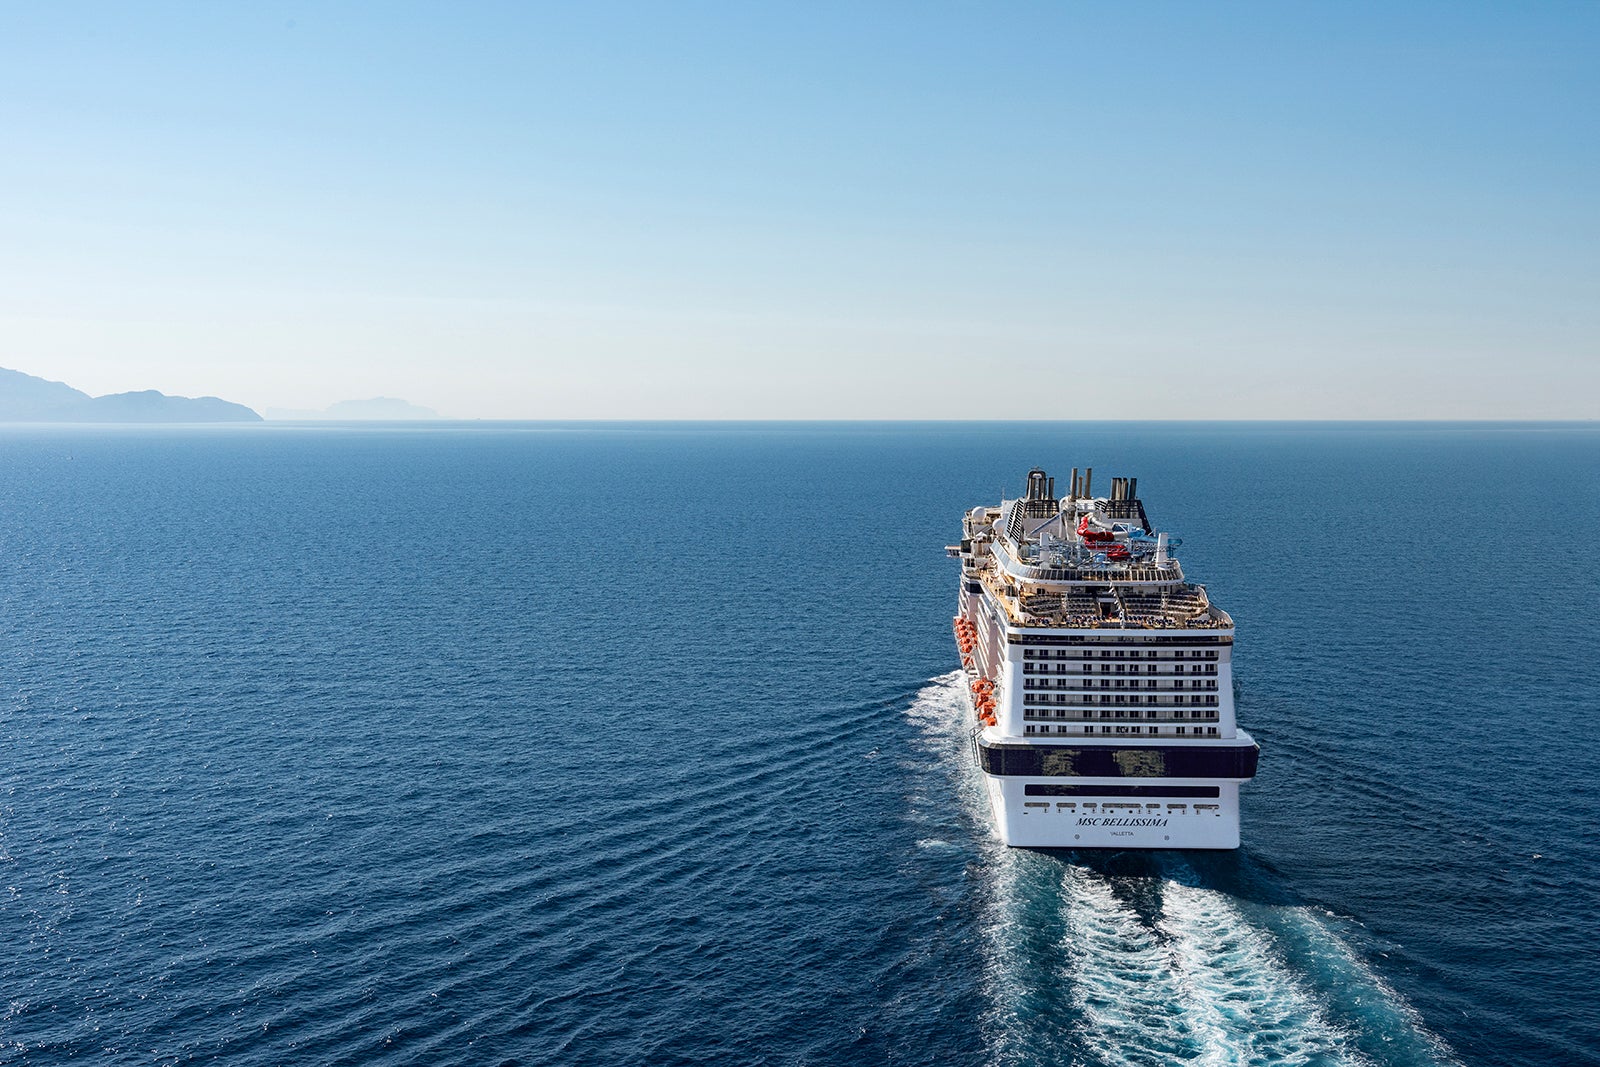 which msc cruise ship is the best